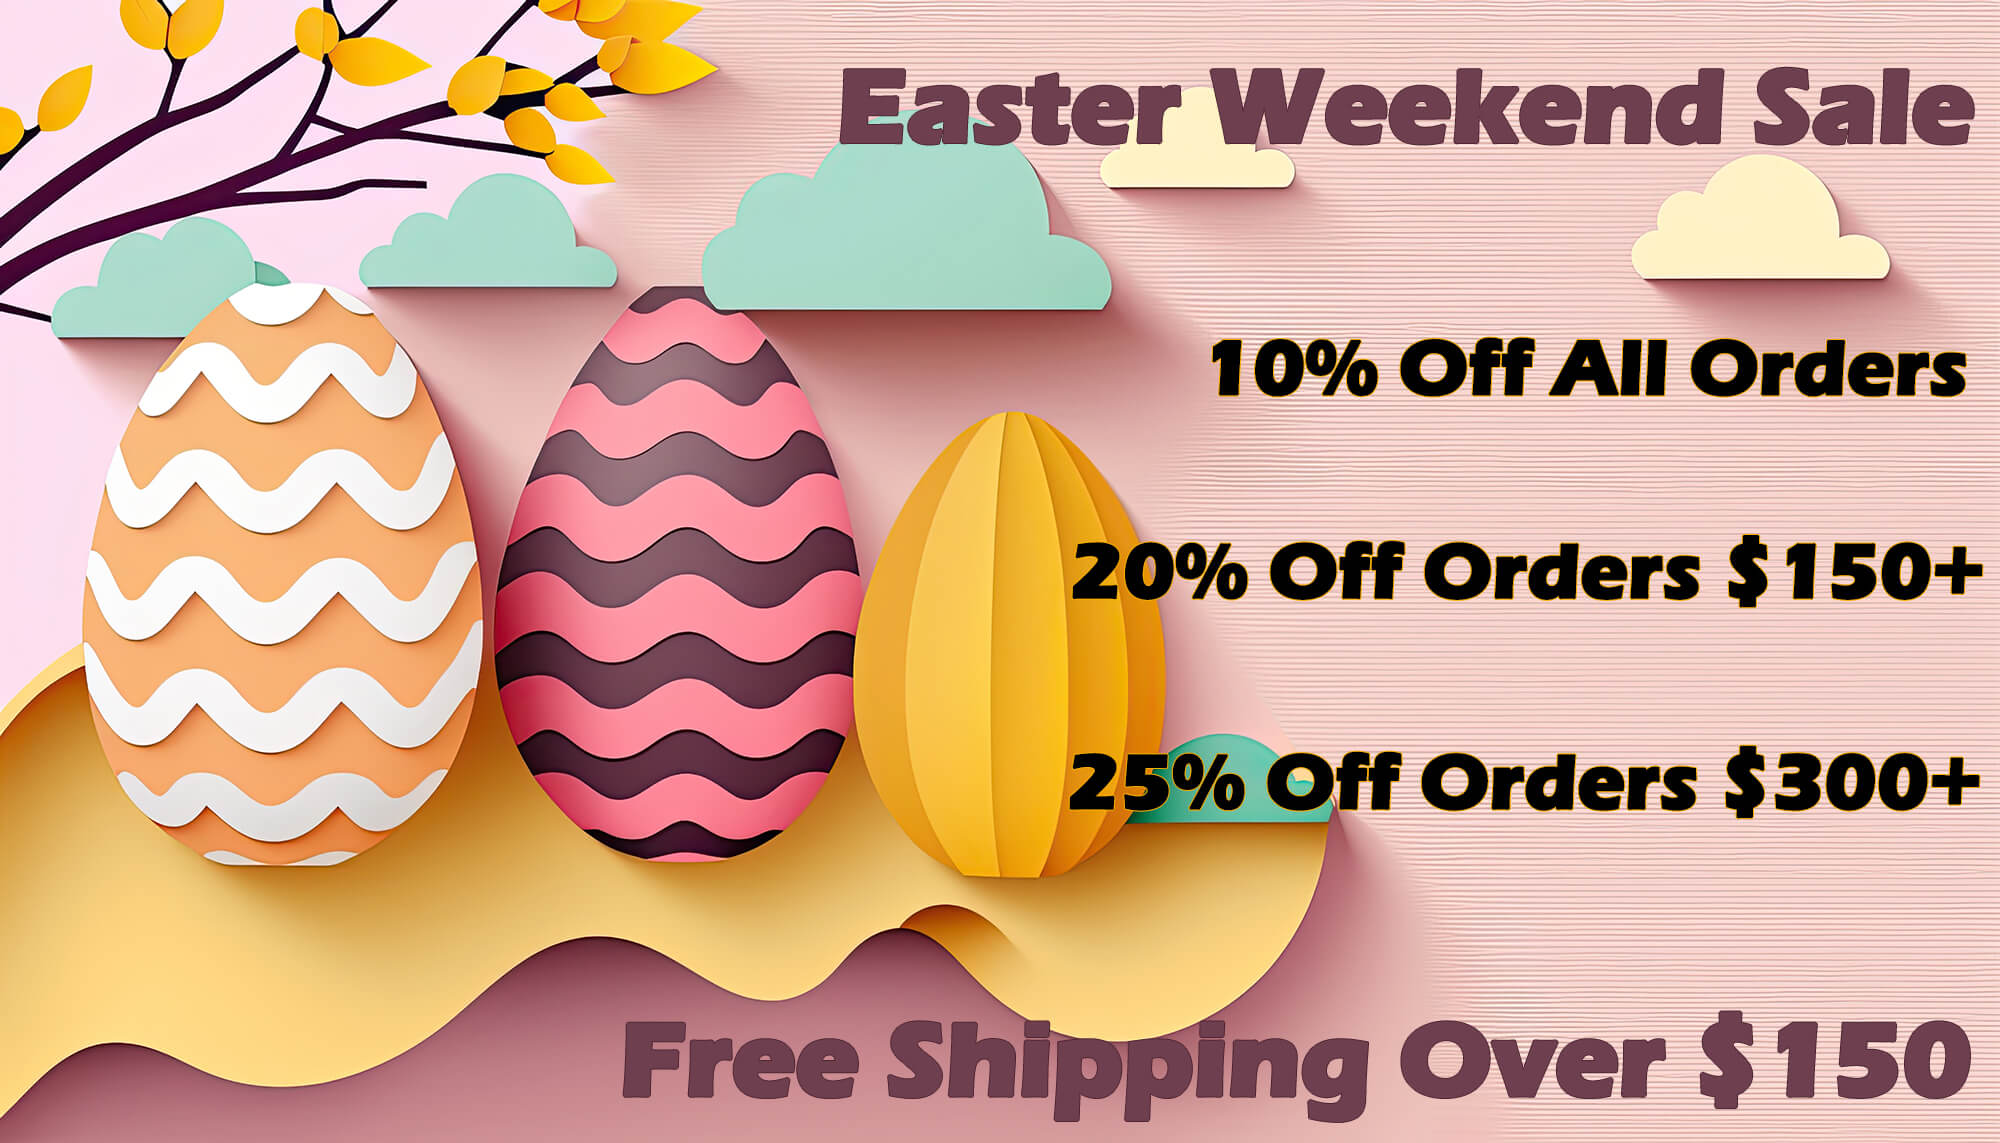 Easter Weekend Sale Graphic | DW